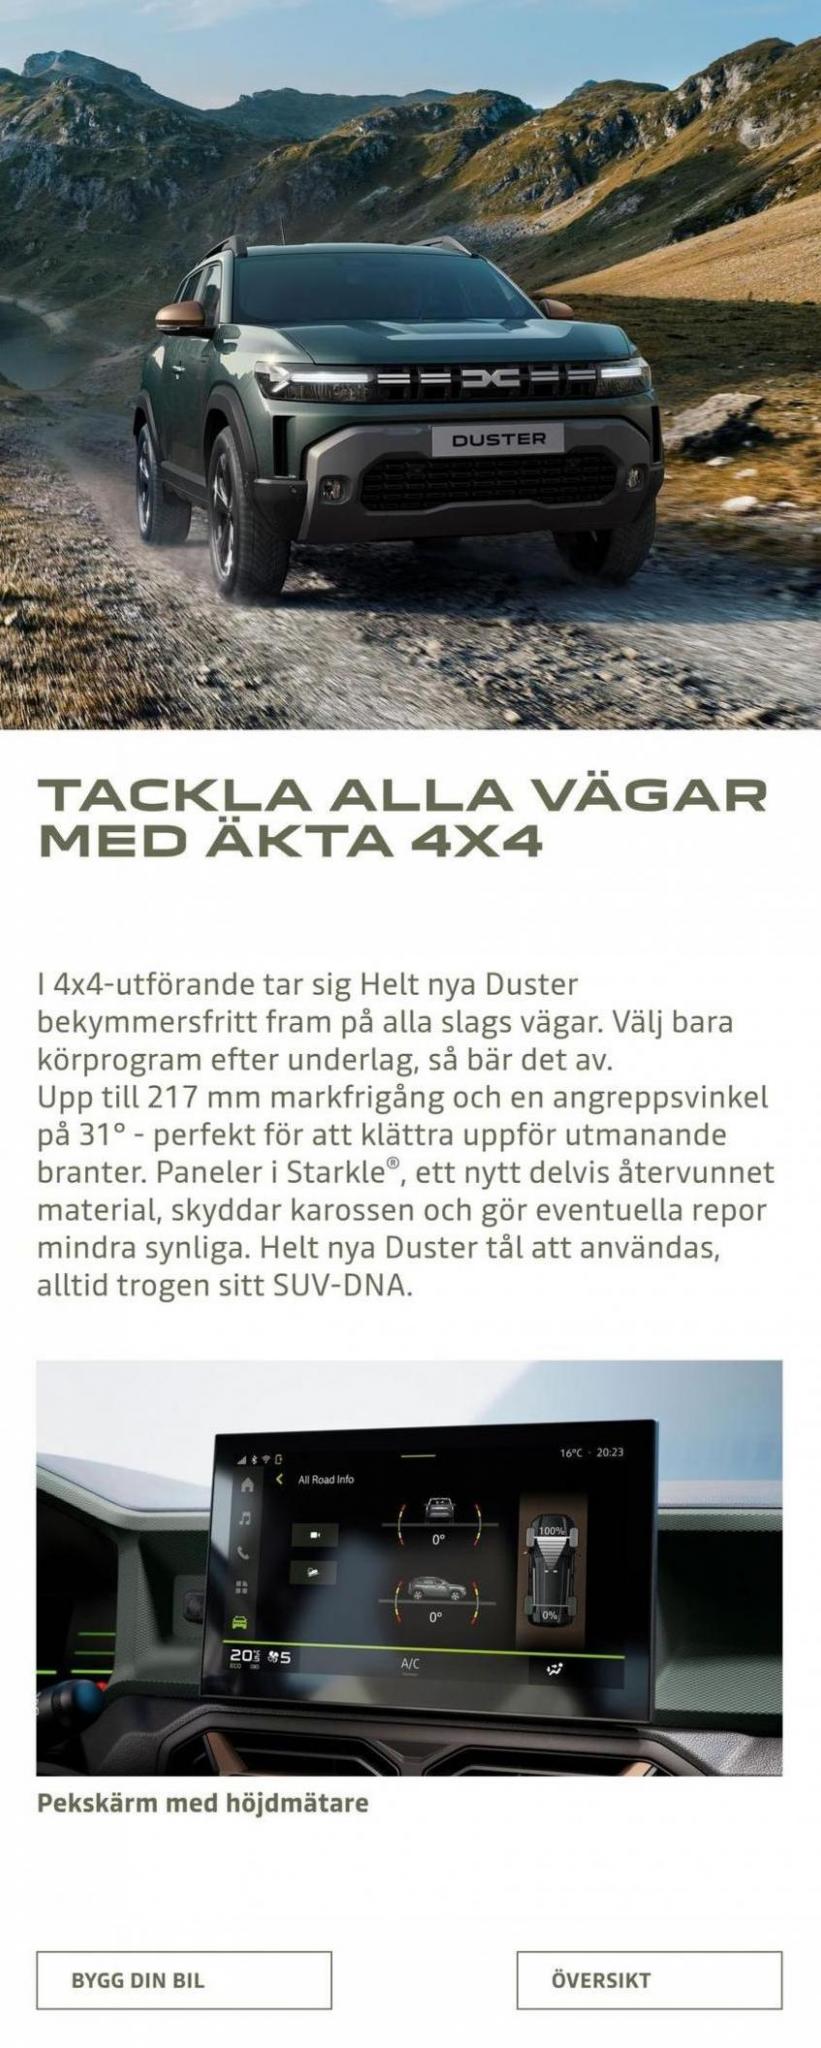 Helt nya Duster. Page 6